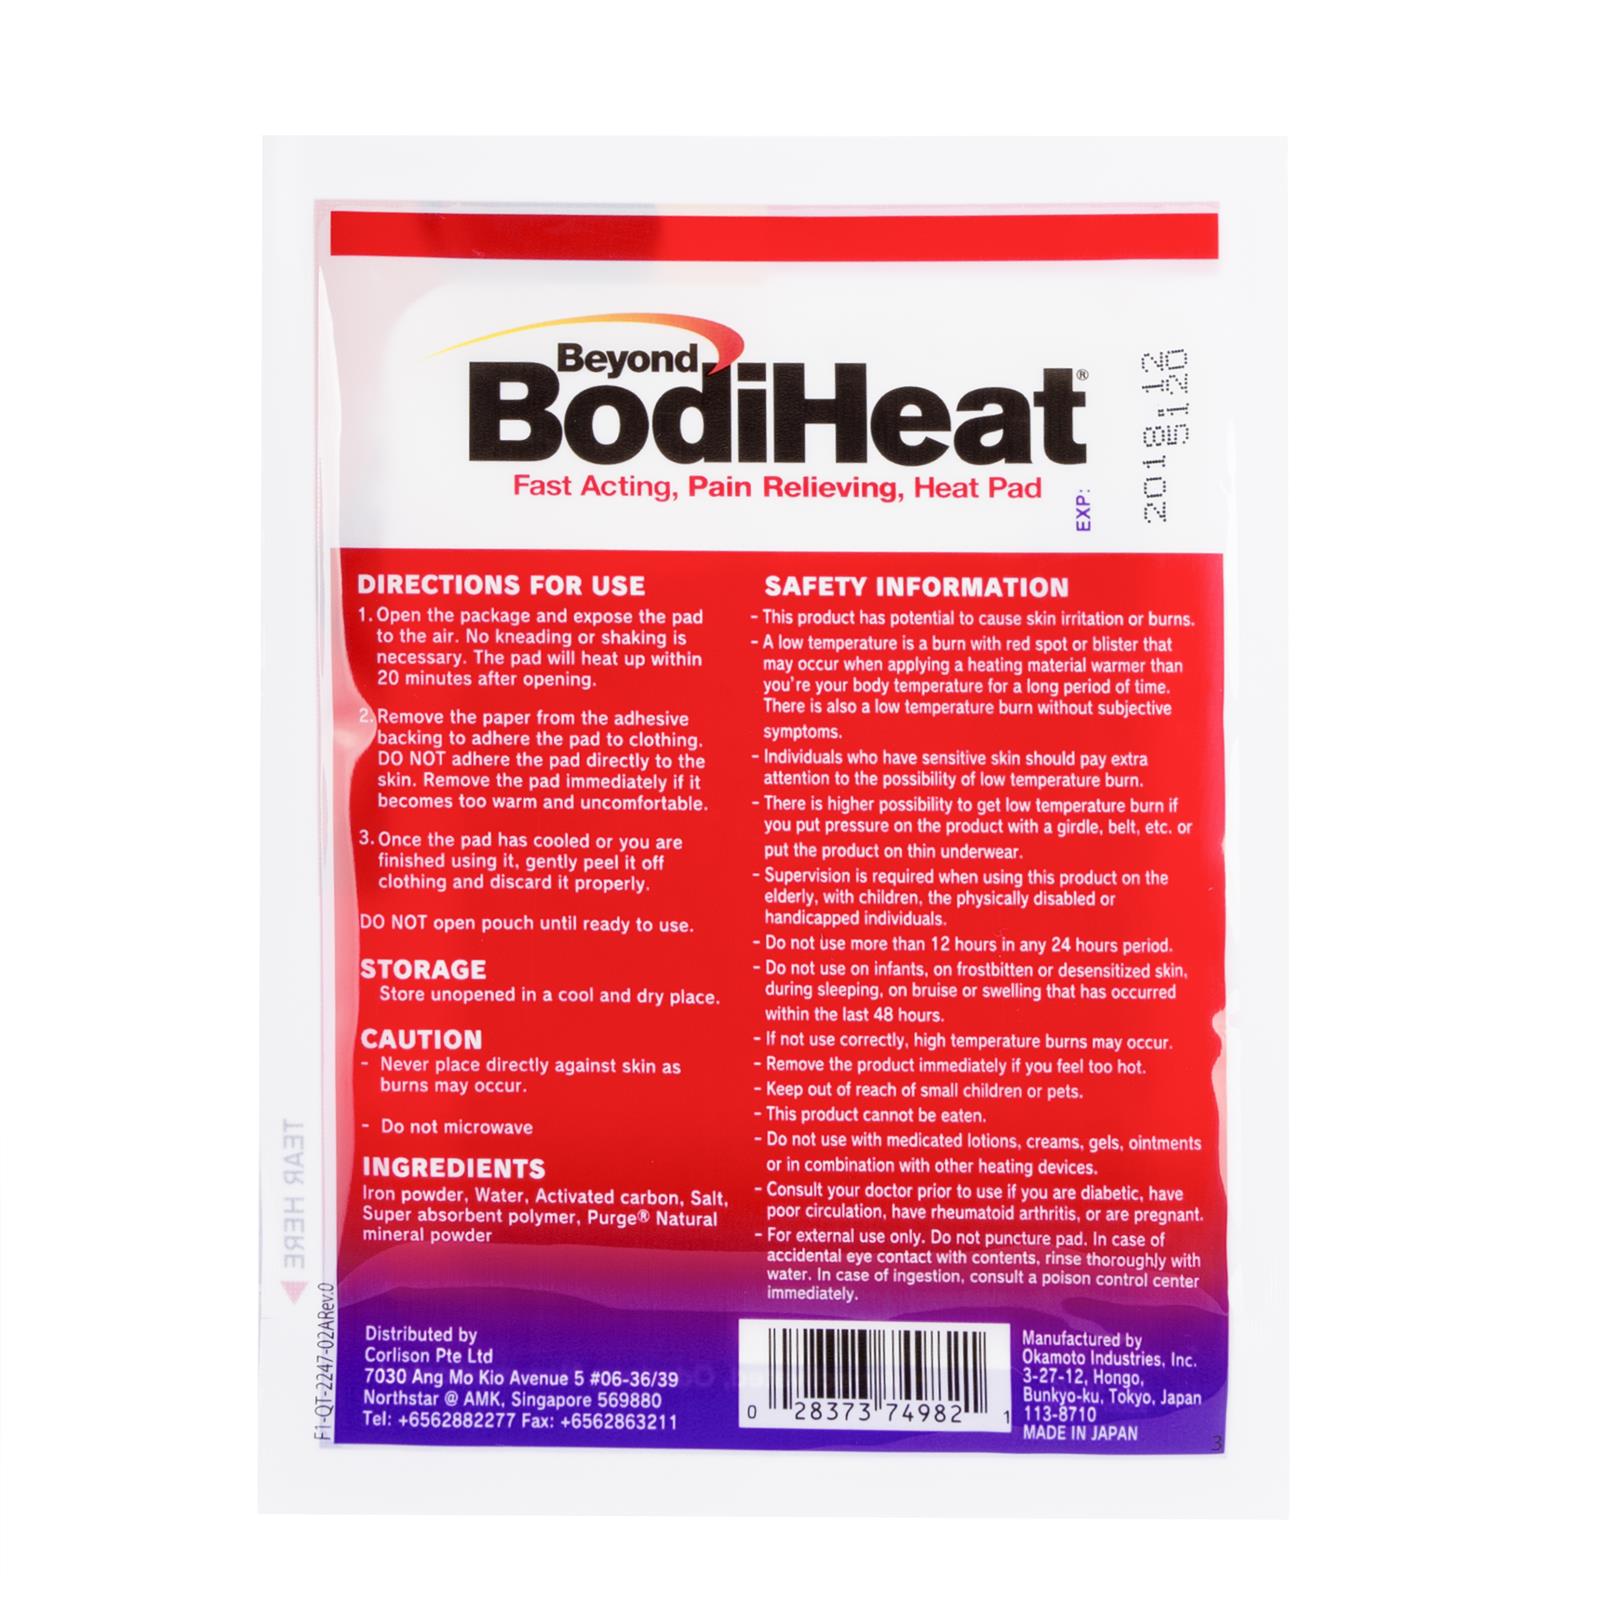 BodiHeat® Fast Acting Pain Relieving Heat Pad 1s